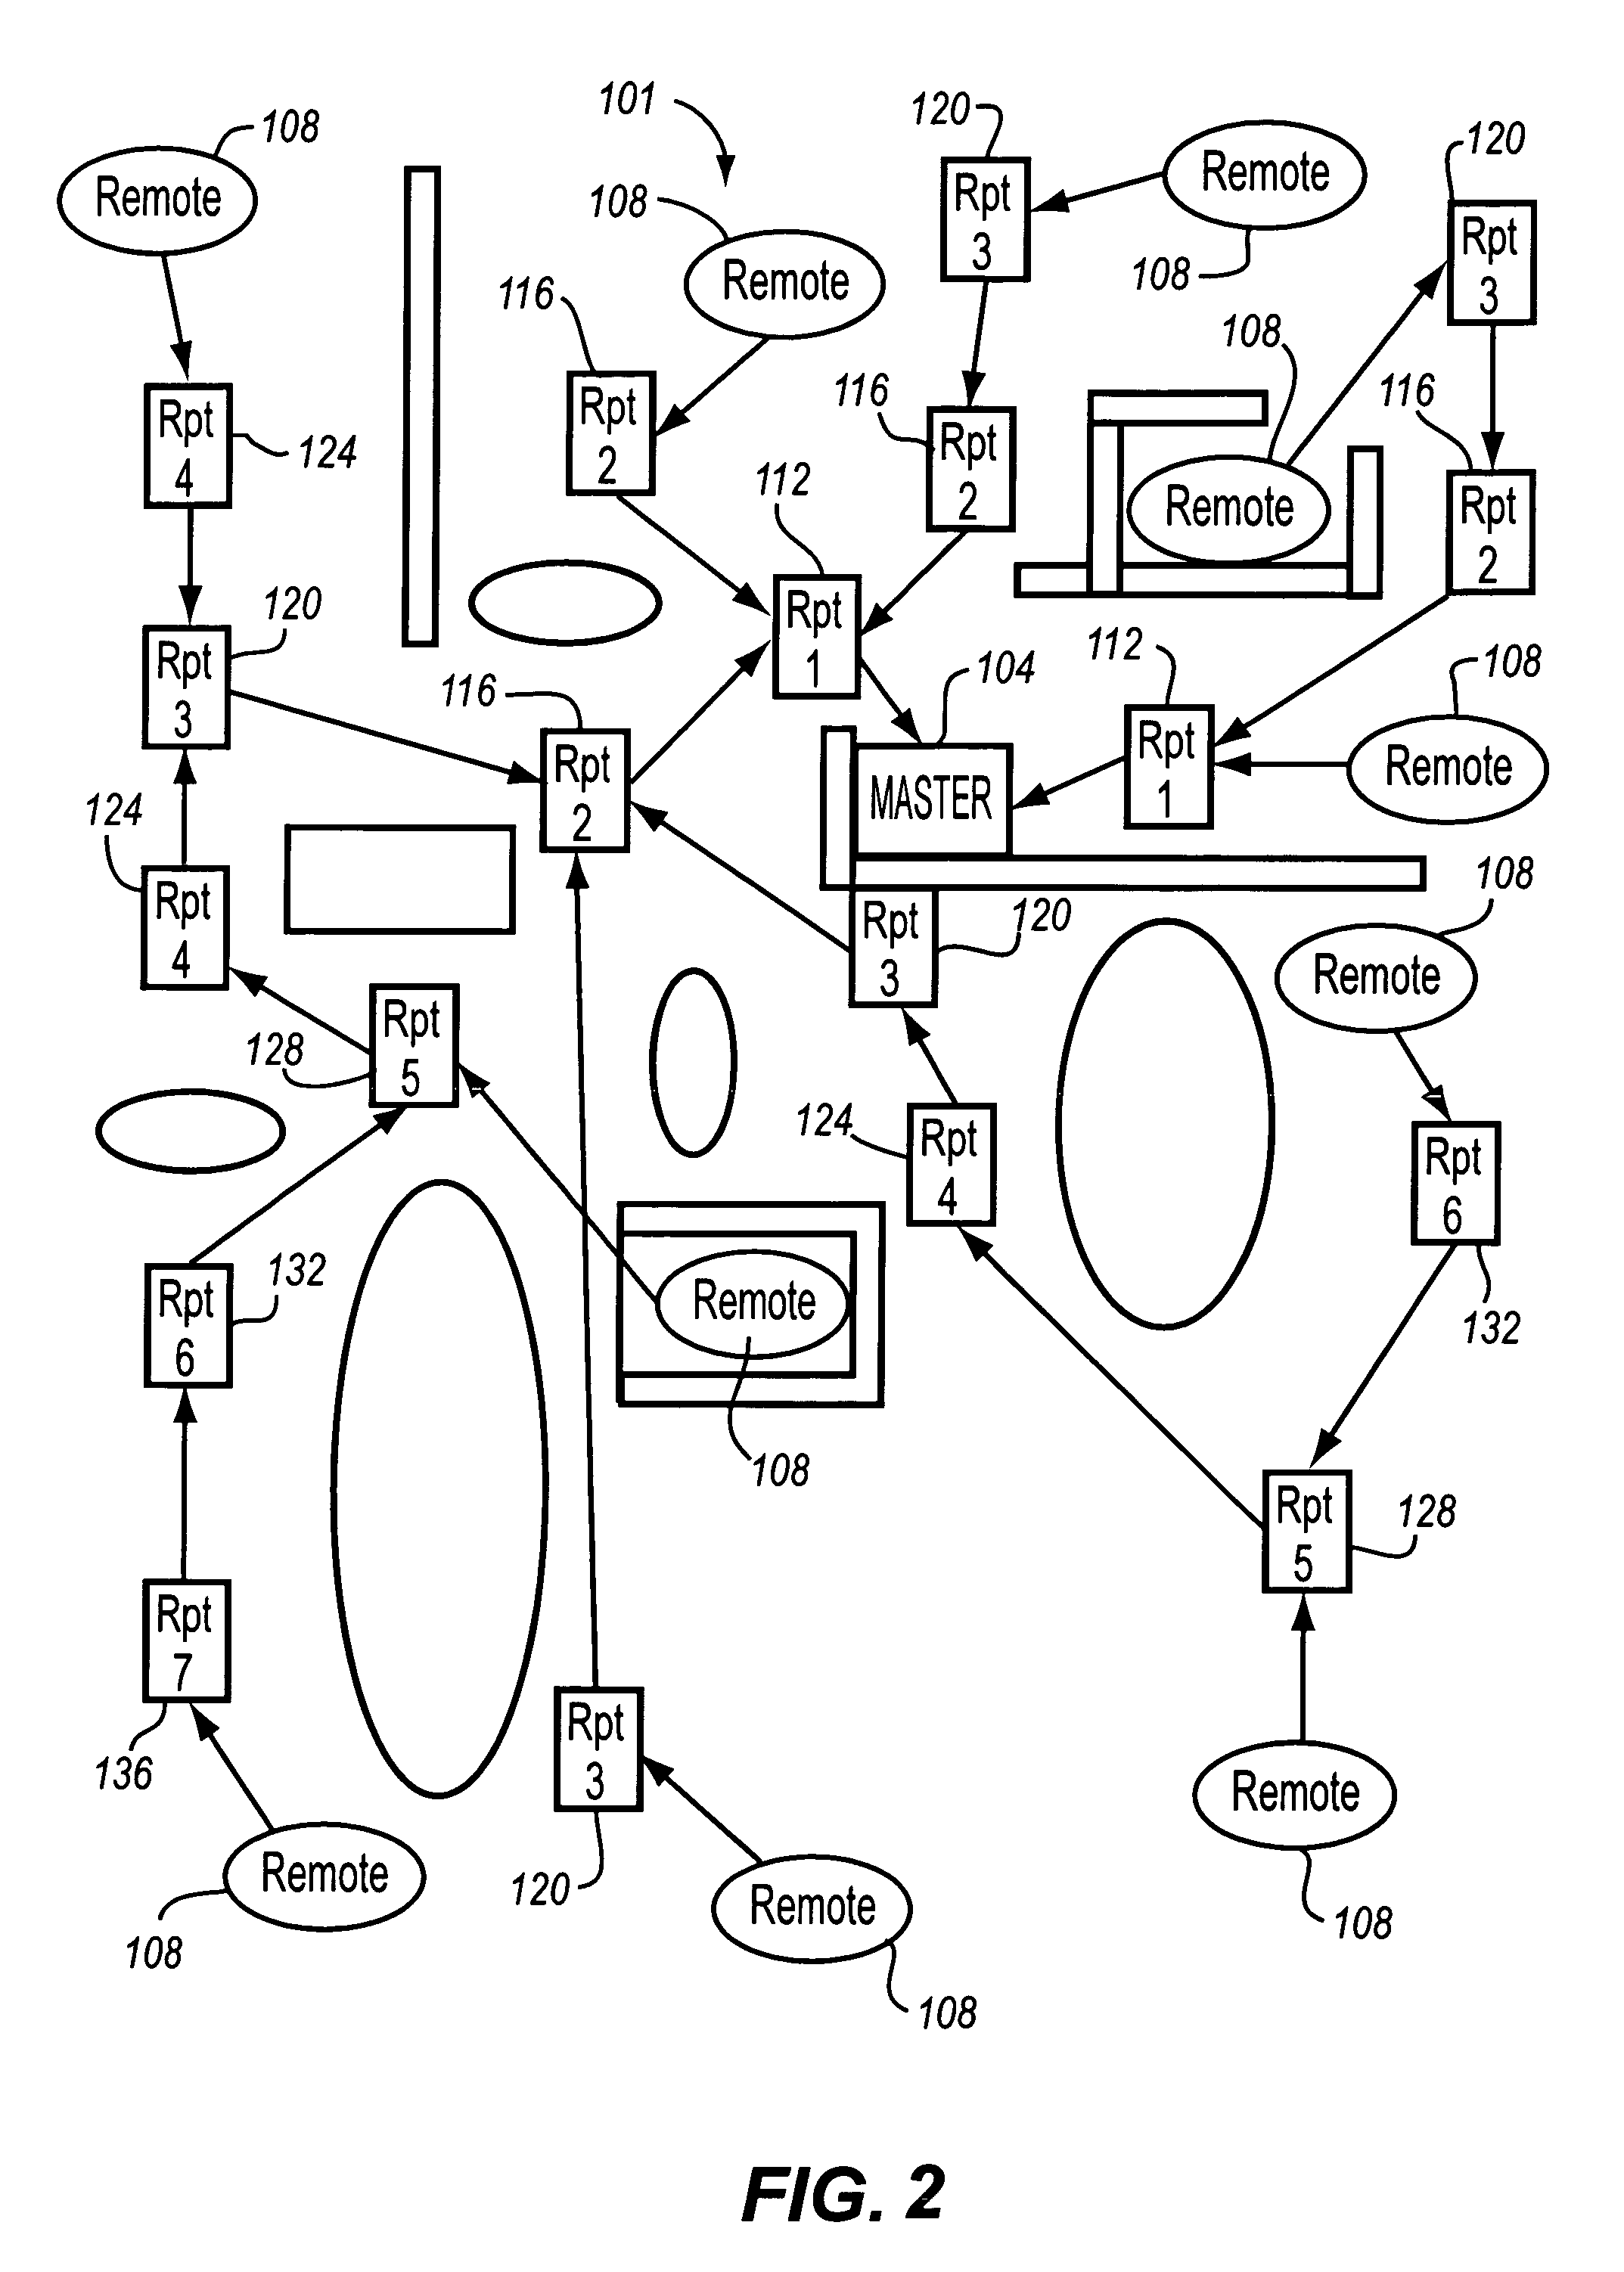 Message control protocol in a communications network having repeaters